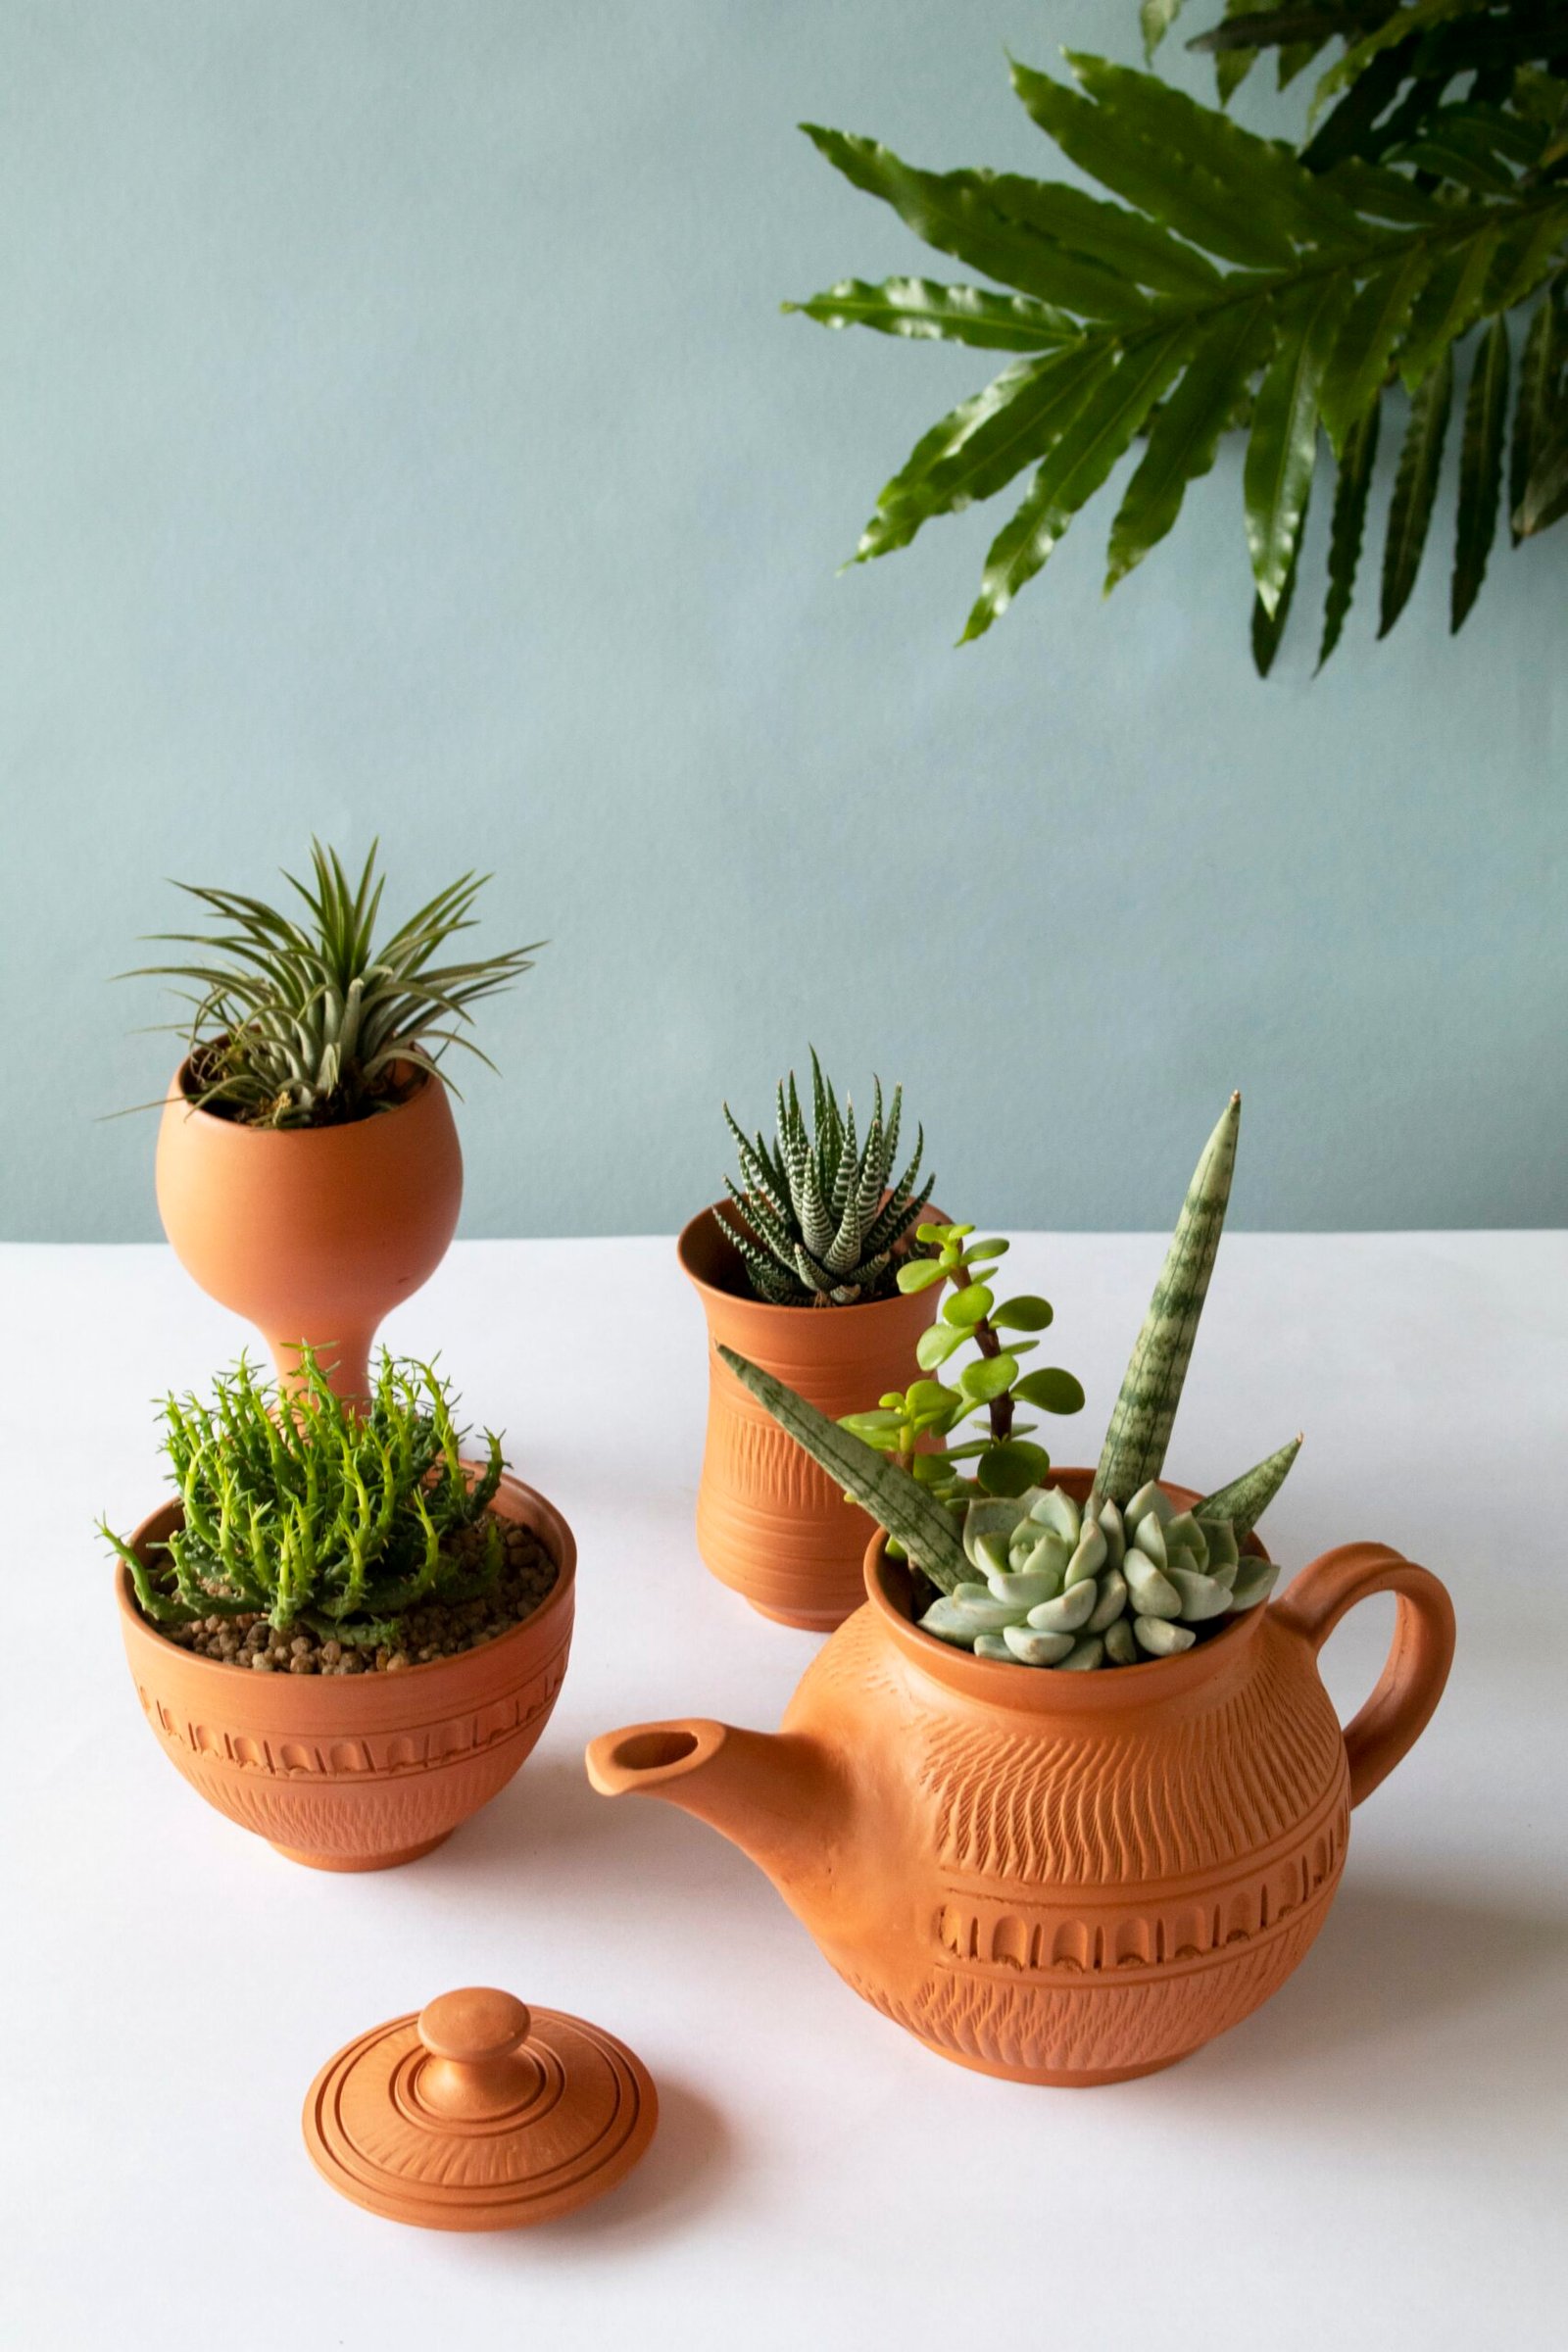 Can I Grow Succulents In A Terracotta Pot?